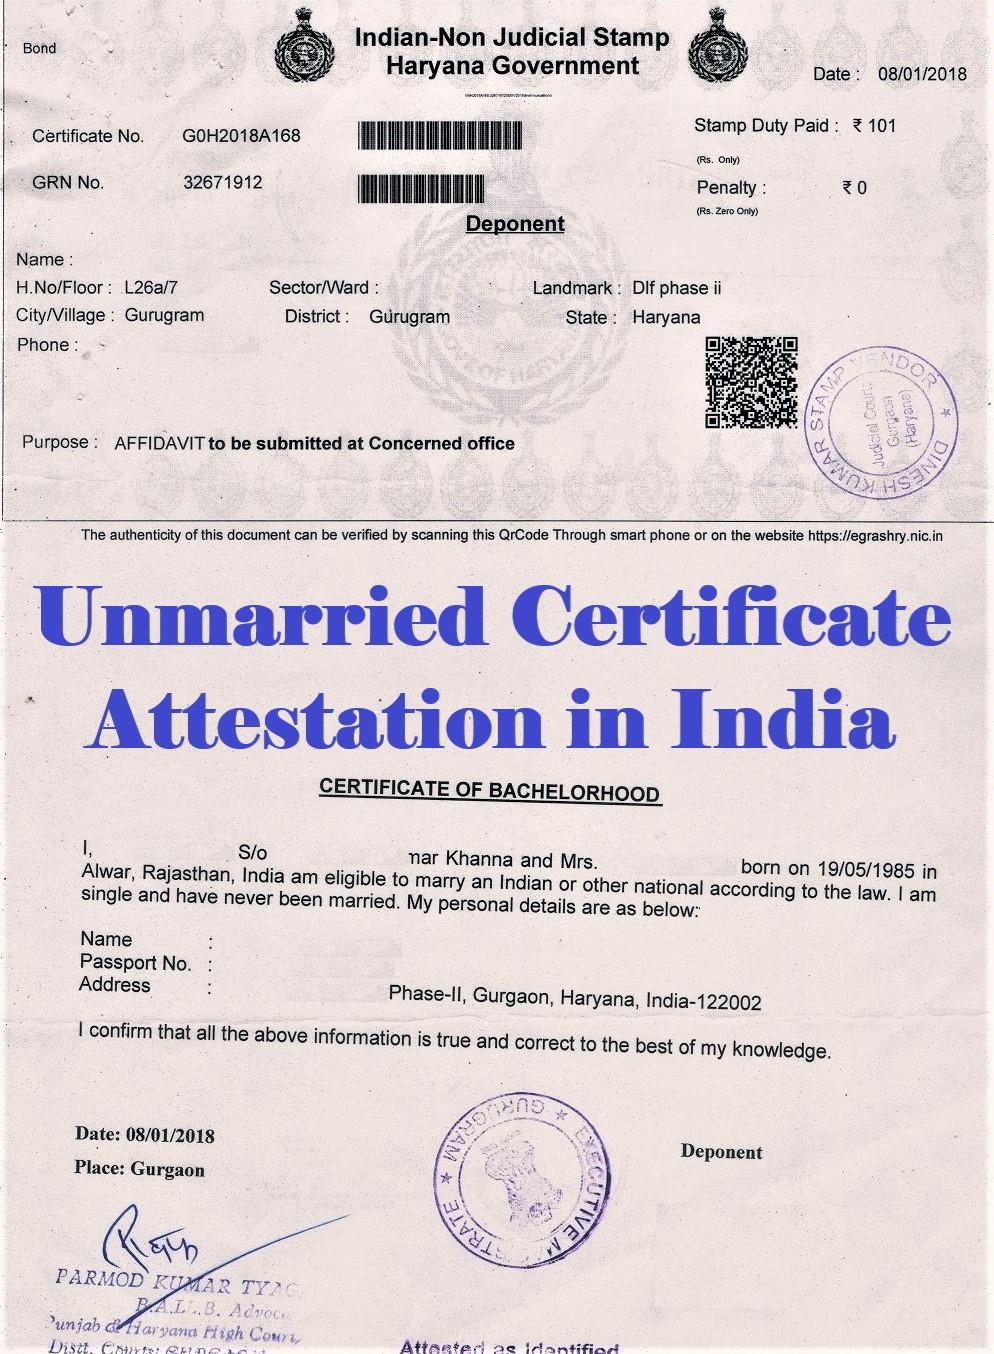 Unmarried Certificate Attestation from Jamaica Embassy